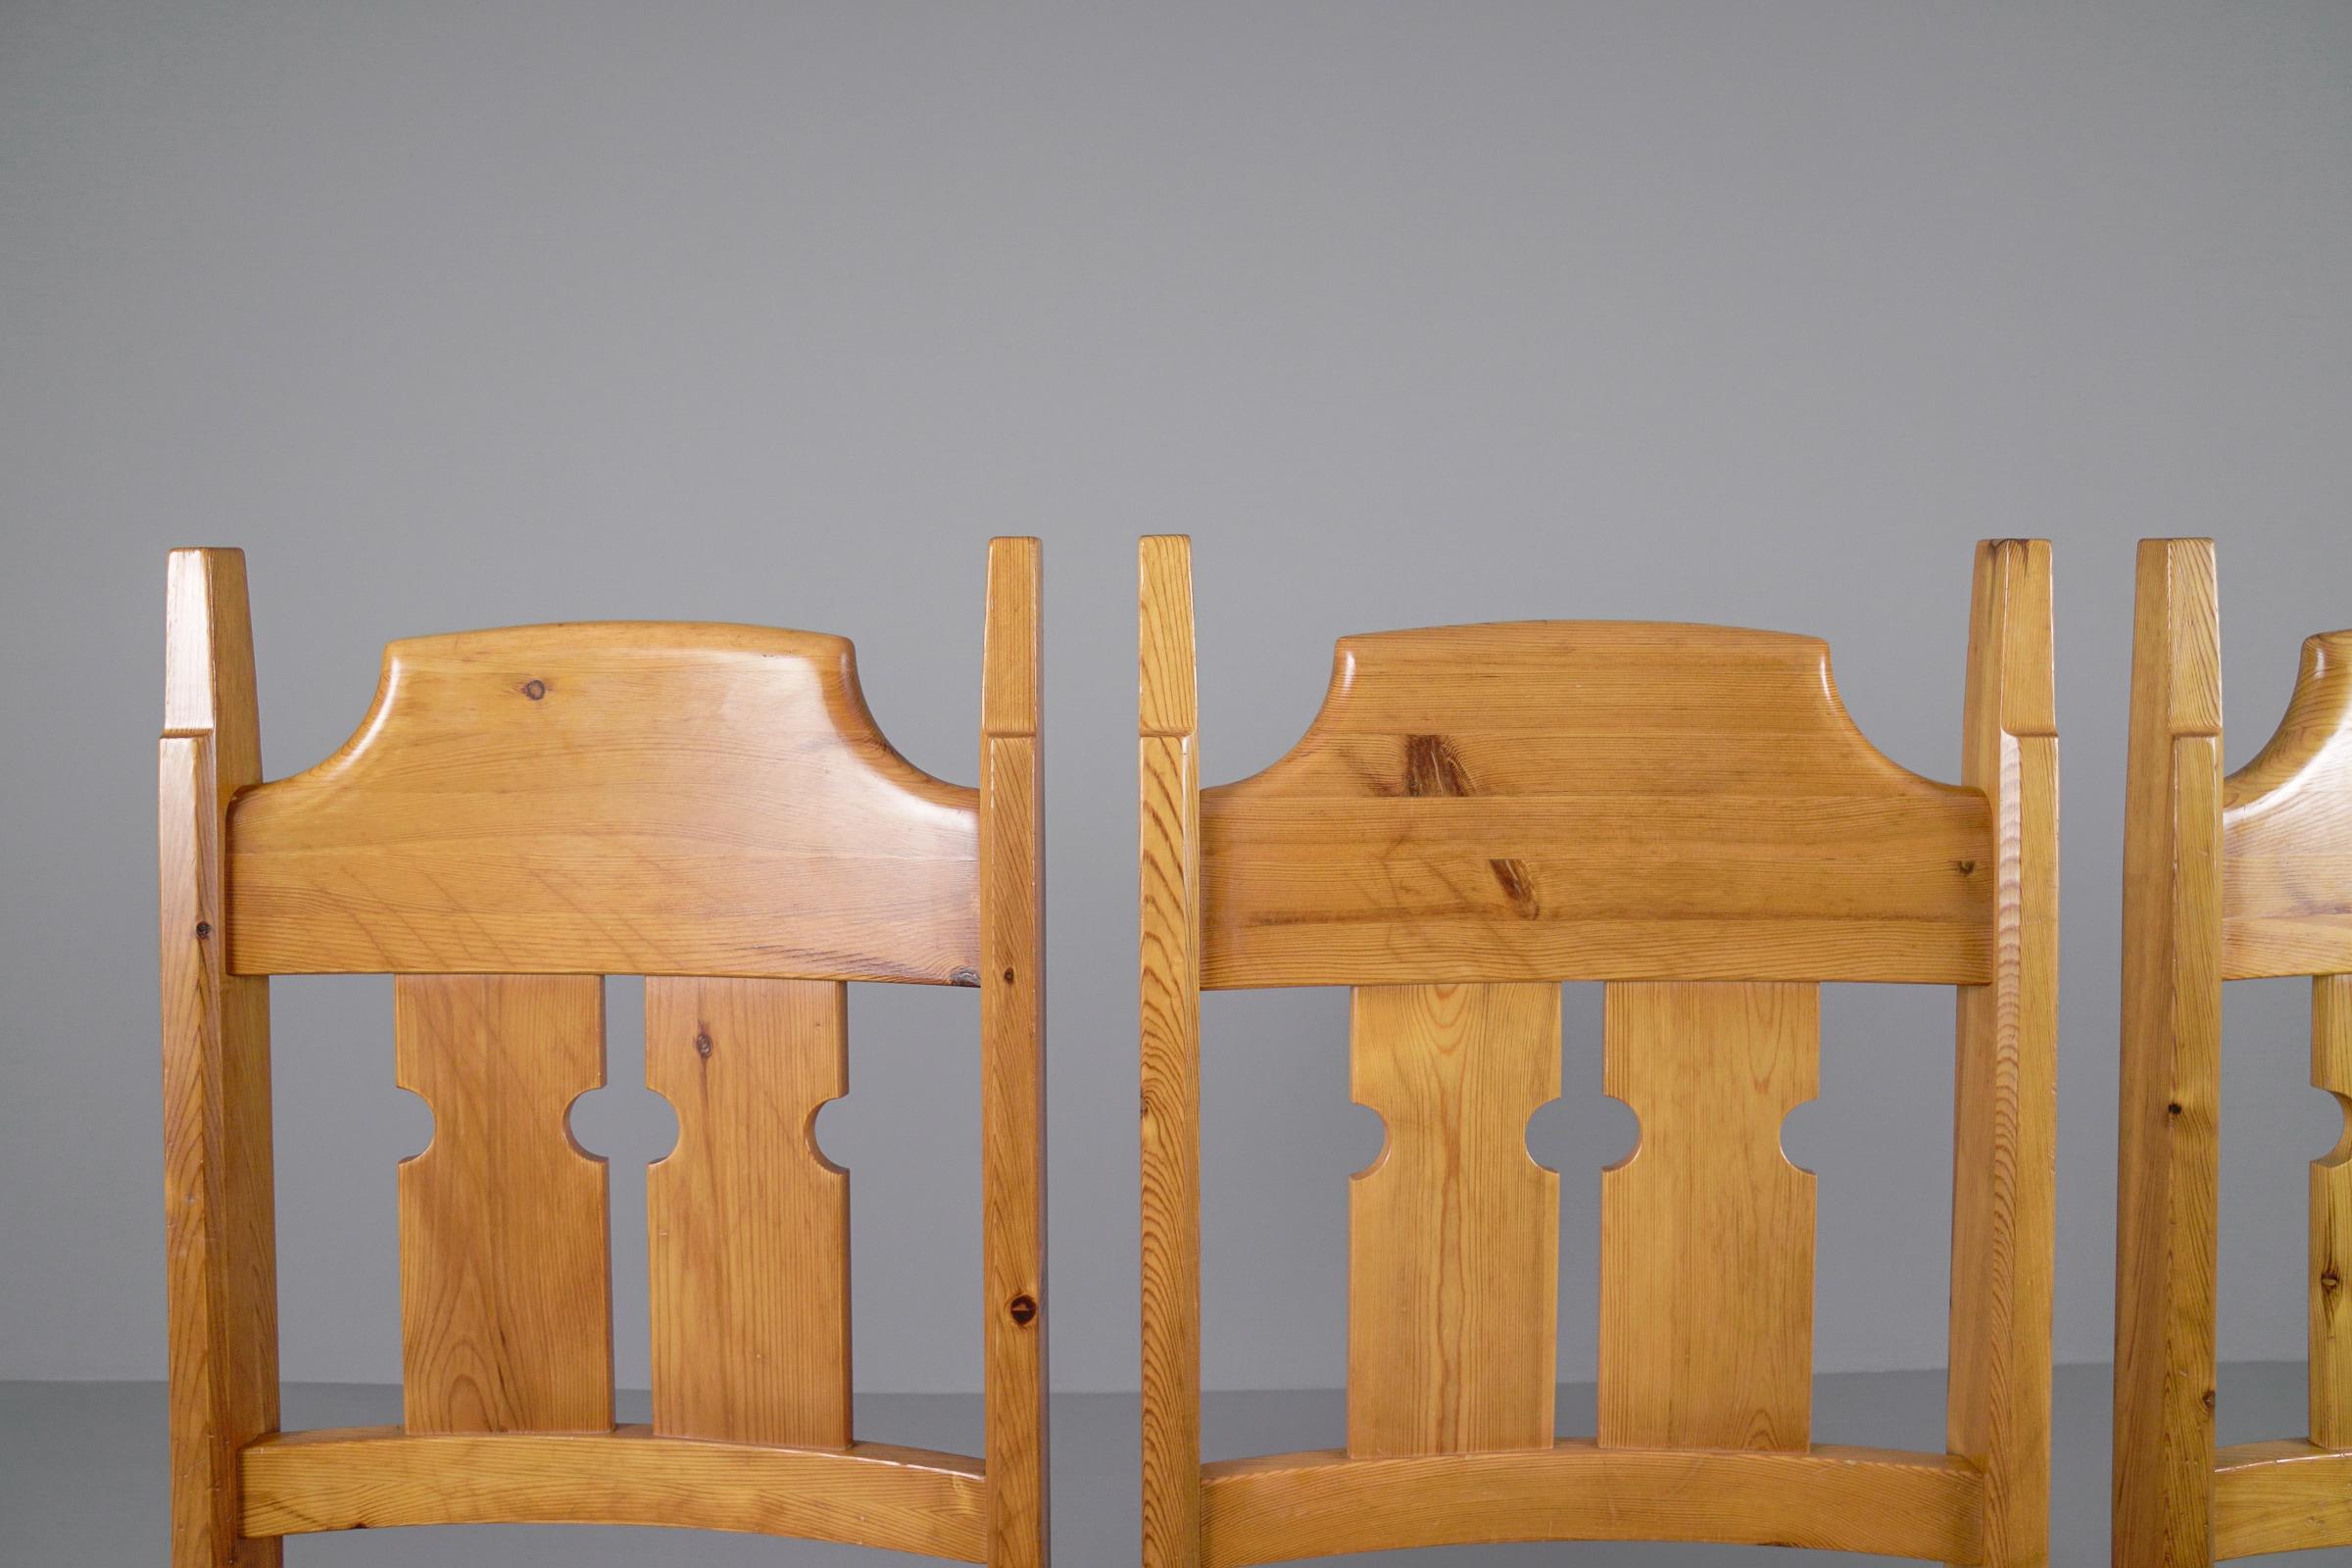  Set of 4 Swedish Pine Chairs by Gilbert Marklund for Furusnickarn AB, 1970s For Sale 1